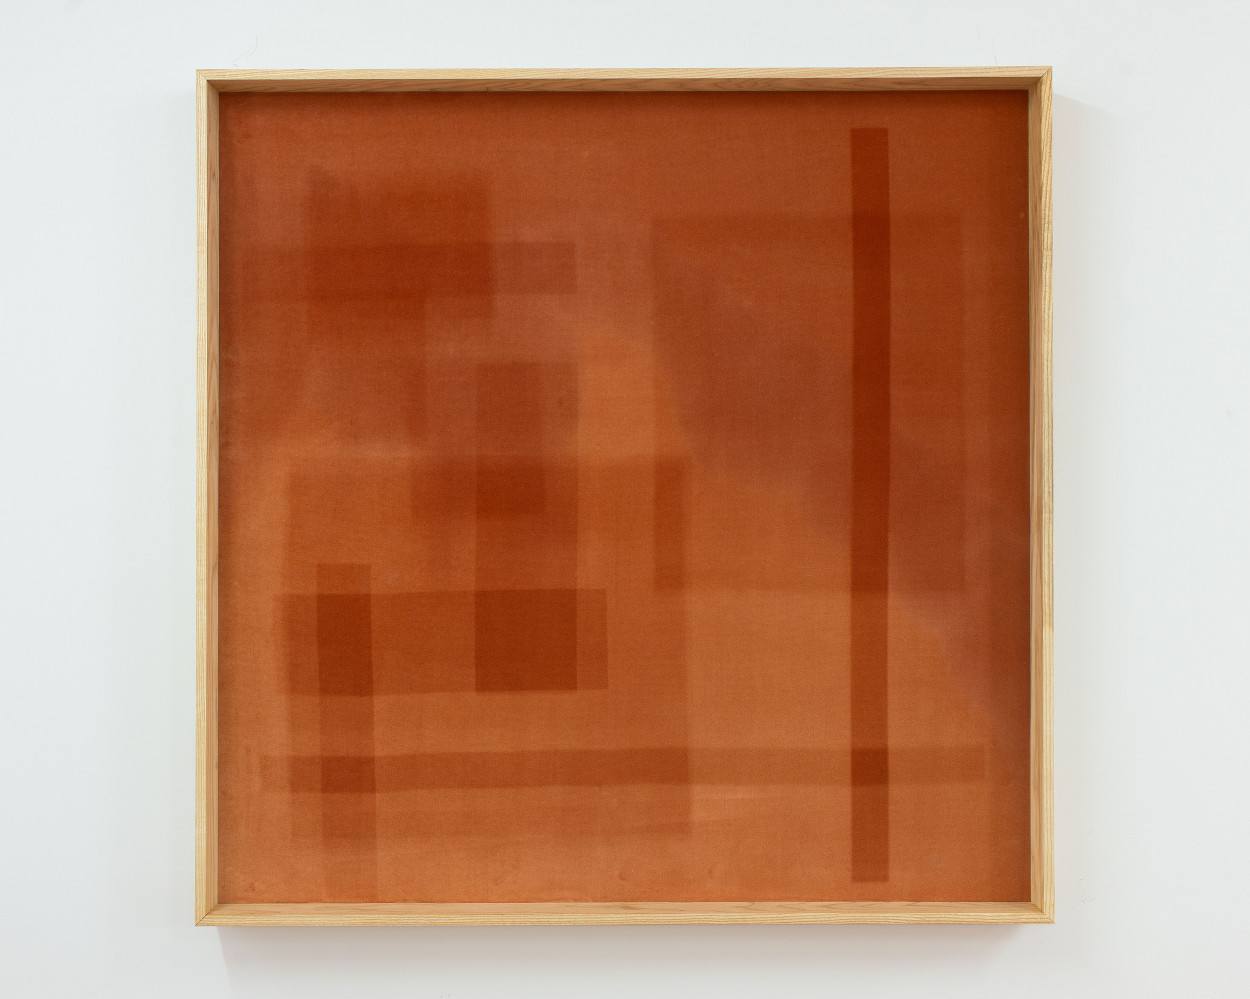 velvet on wooden board, wooden frame 90 x 90 x 7 cm; courtesy the artist and Pola Magnetyczne Gallery, Warsaw